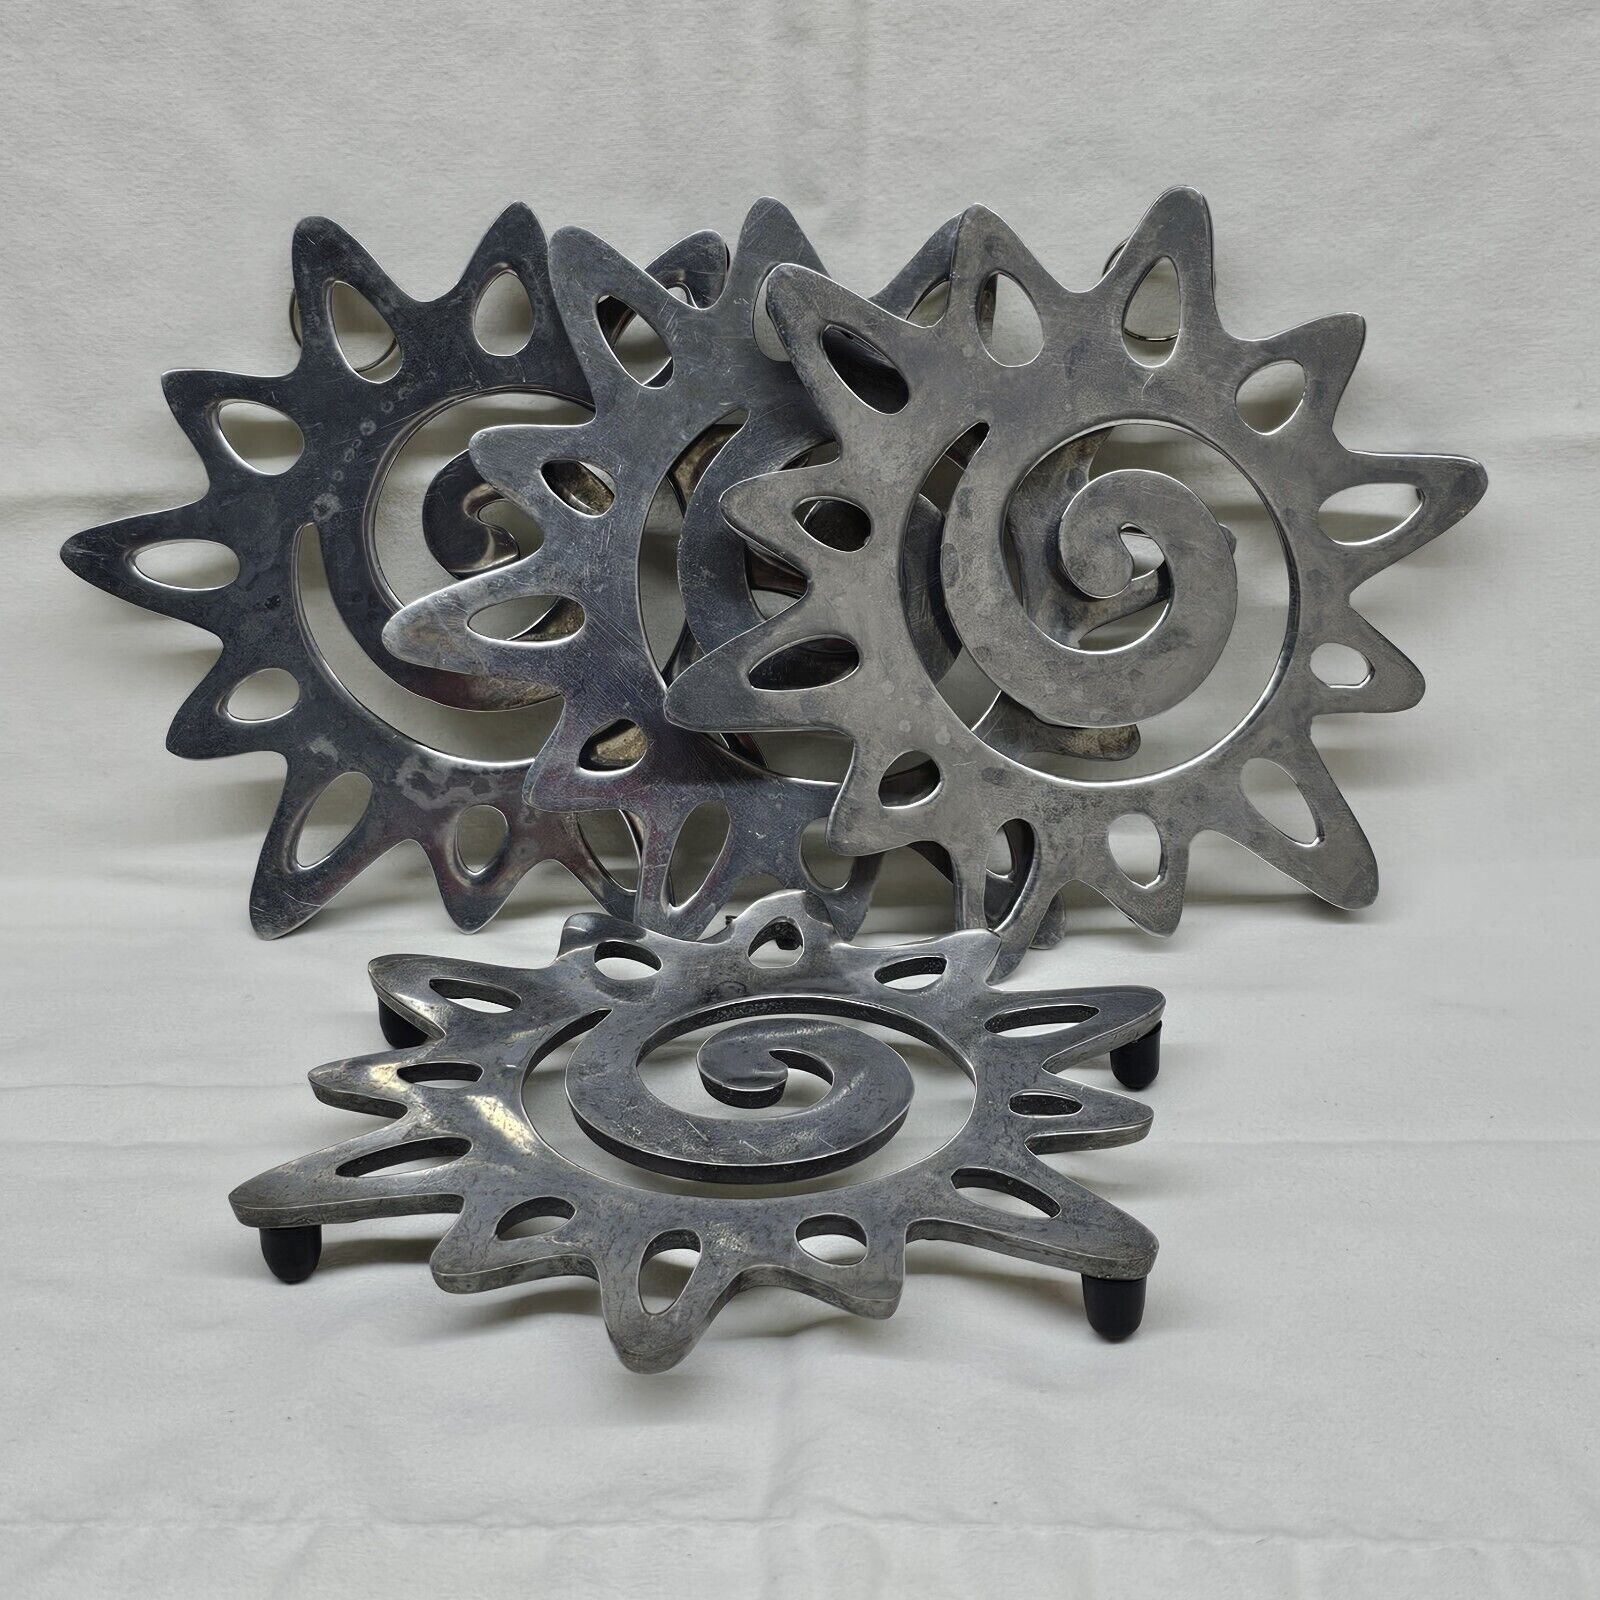 4 Copco Trivet Hot Plate Cast Aluminum Wall Hanging Abstract Assymetrical 6